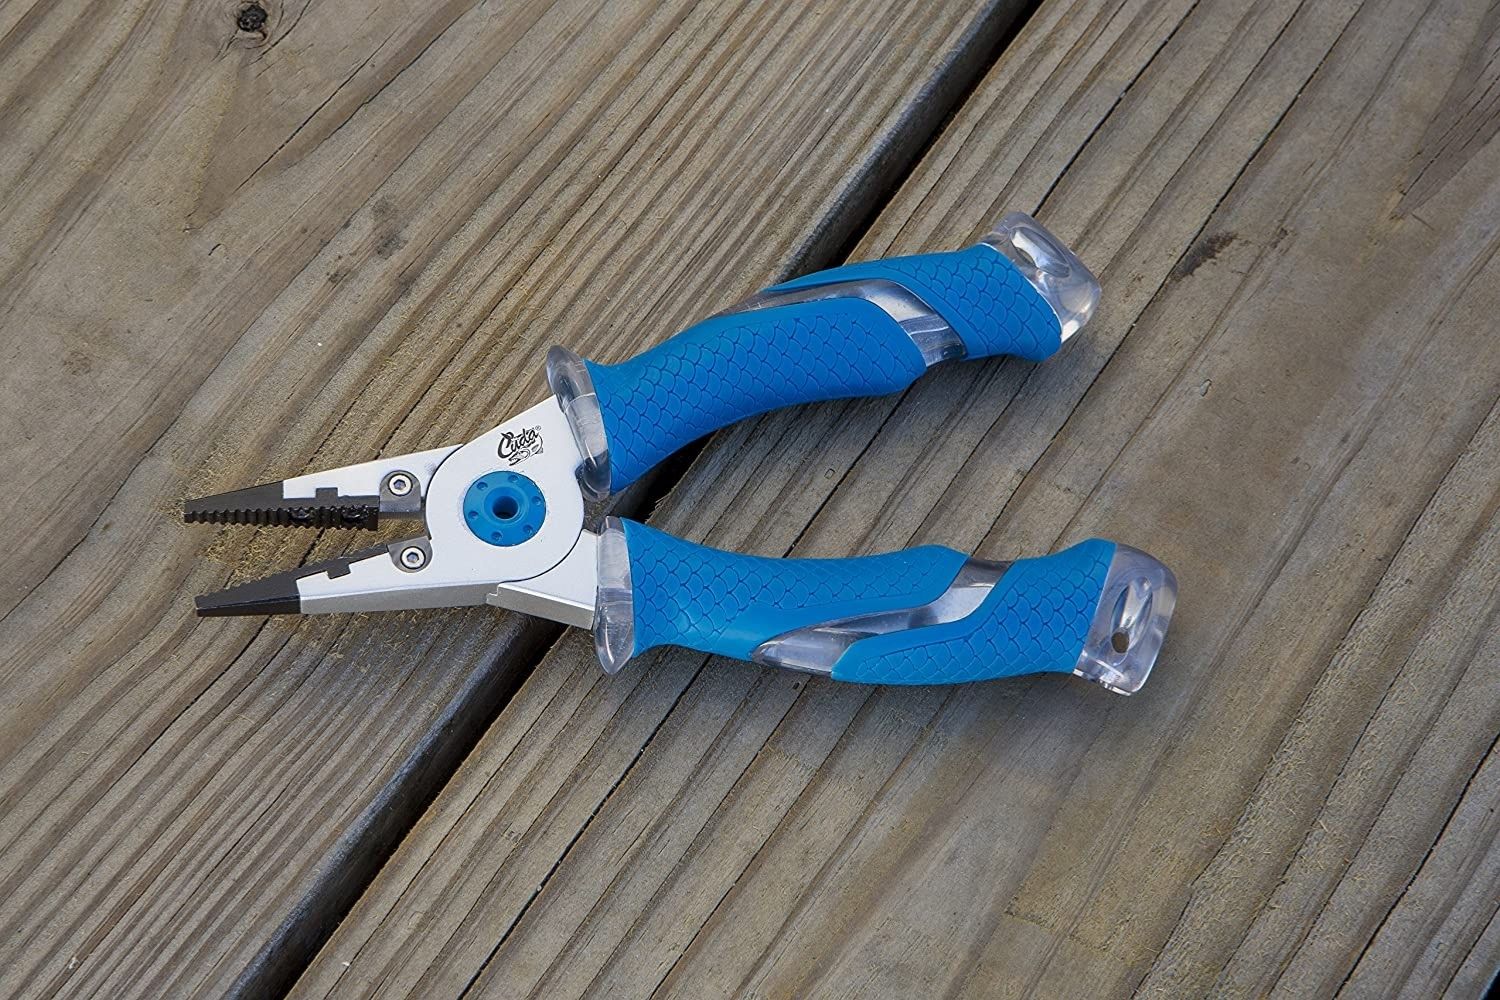 https://www.bobvila.com/wp-content/uploads/2020/09/The-Best-Fishing-Pliers-for-Unhooking-Your-Monster-Catch.jpg?strip=all&quality=95